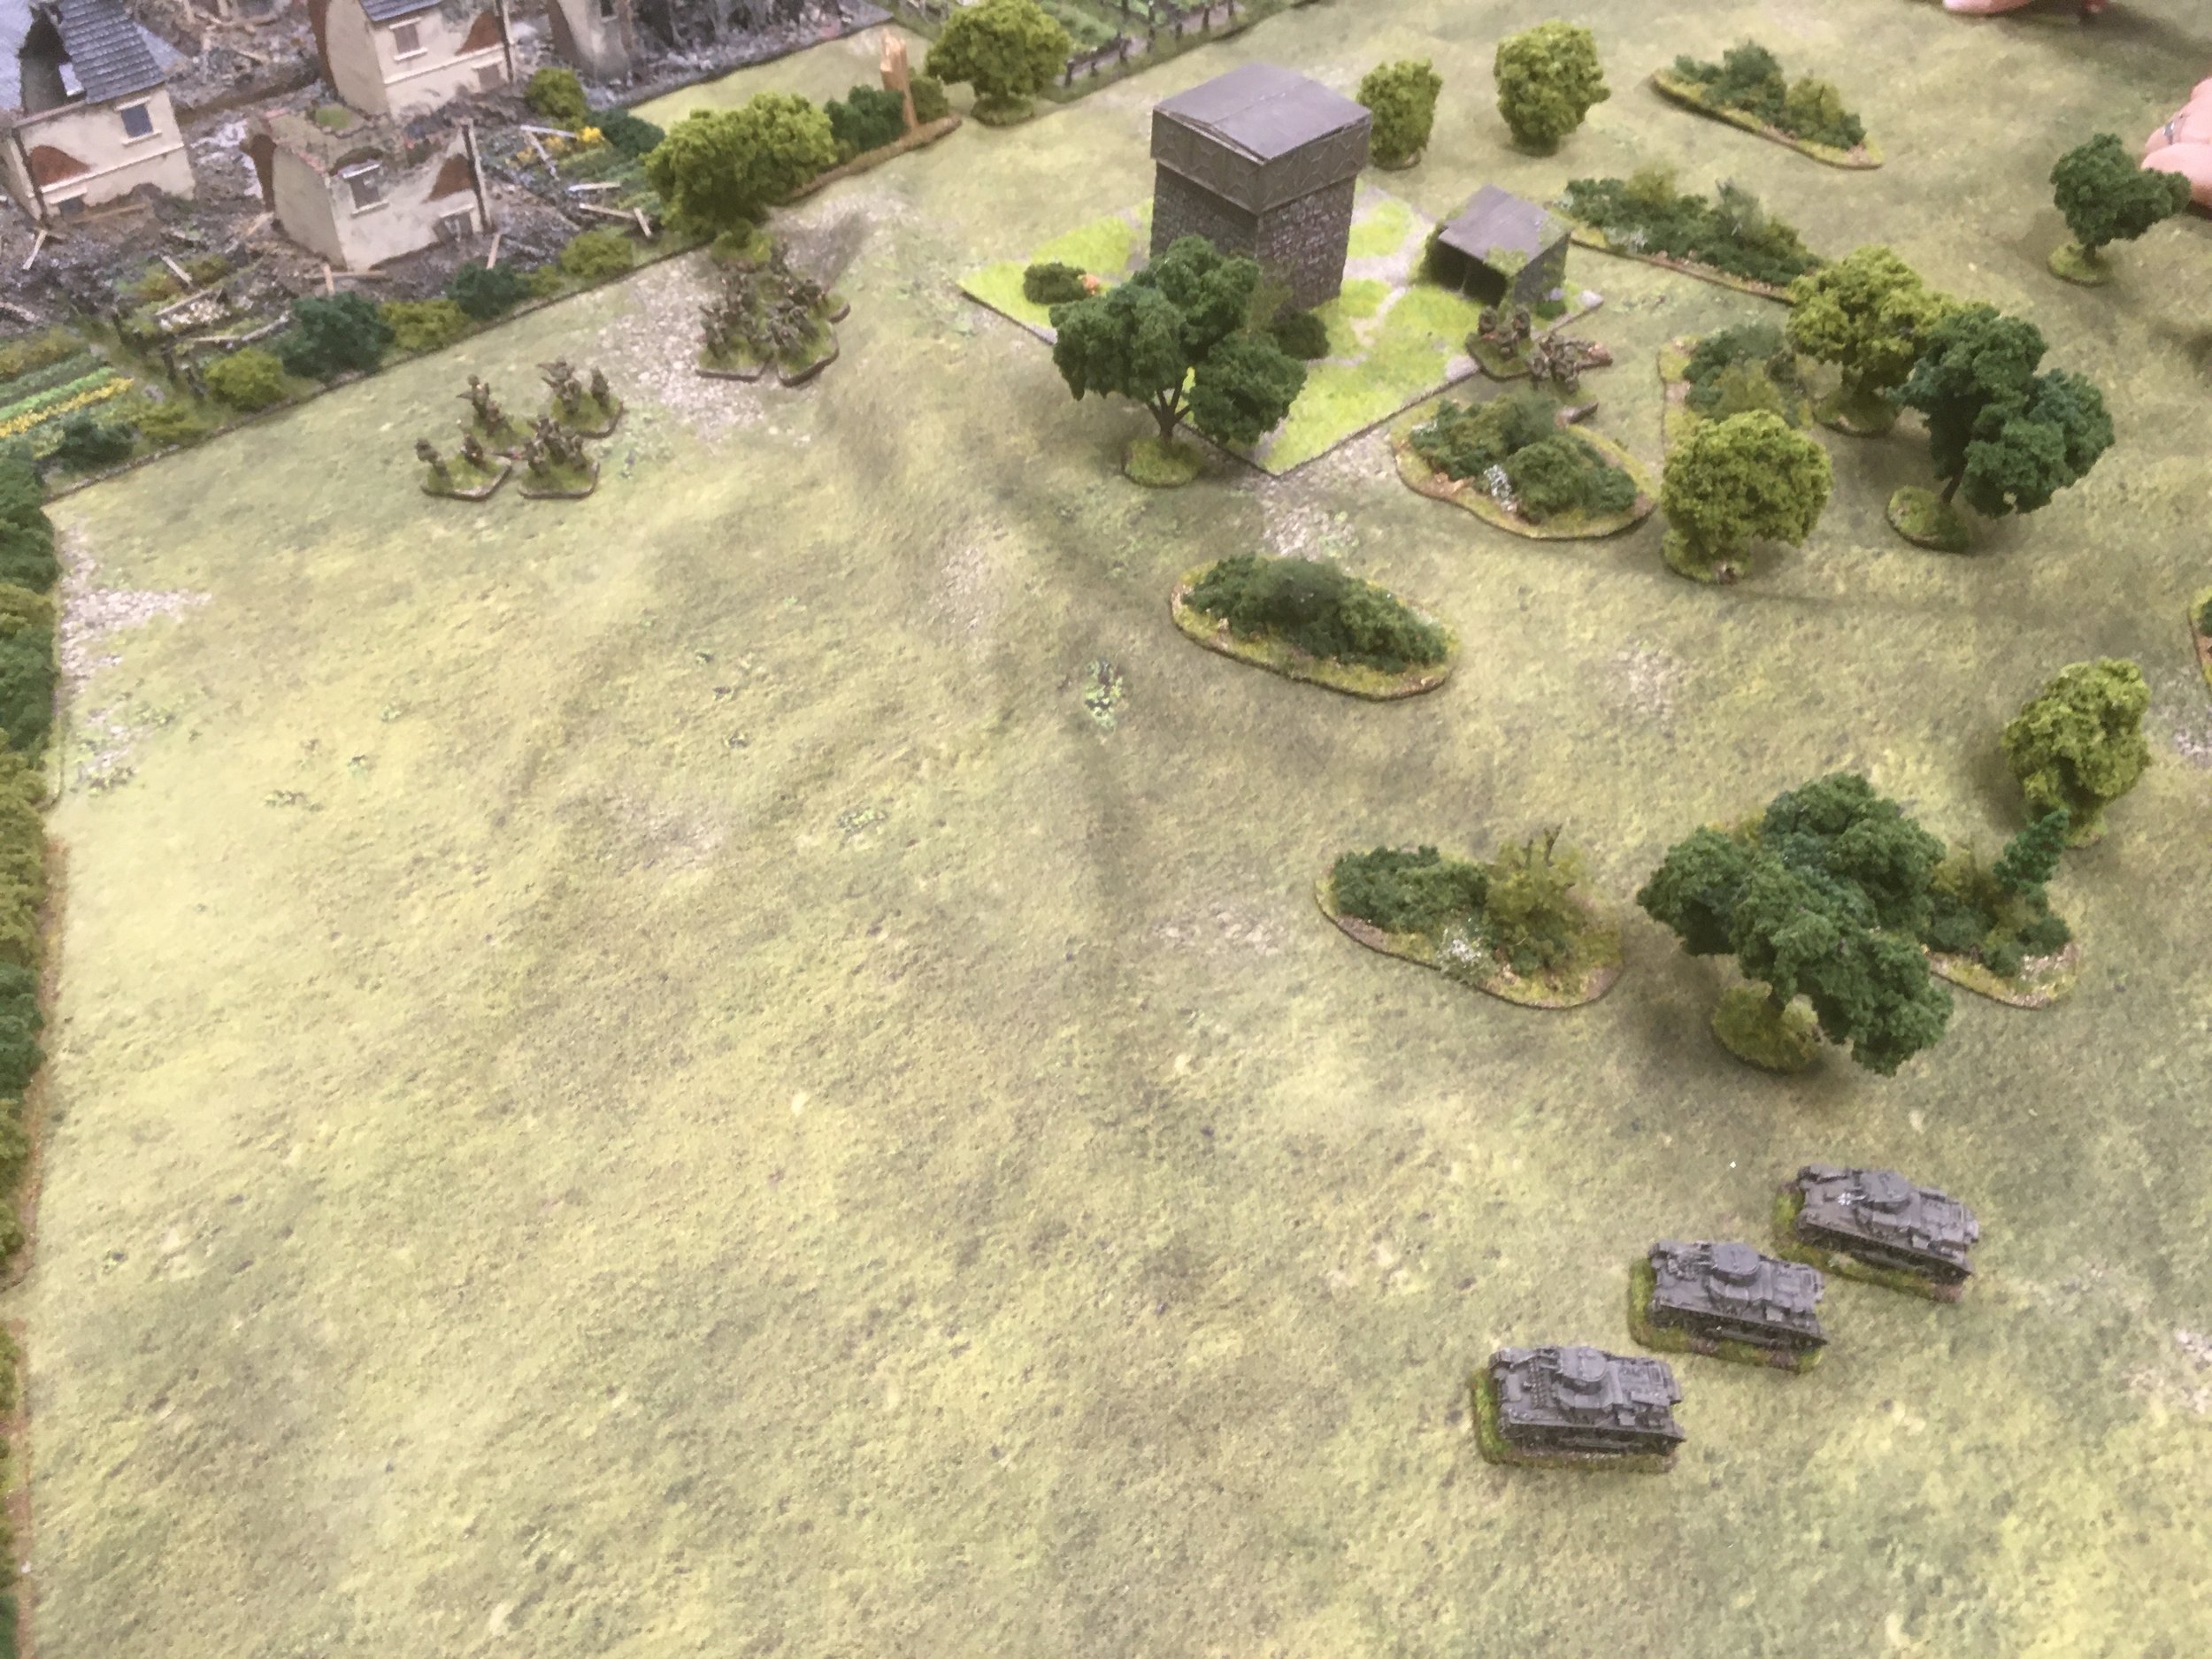 As the Panzer I's skirt around the wooded hill in an effort to catch the retreating French in open ground.